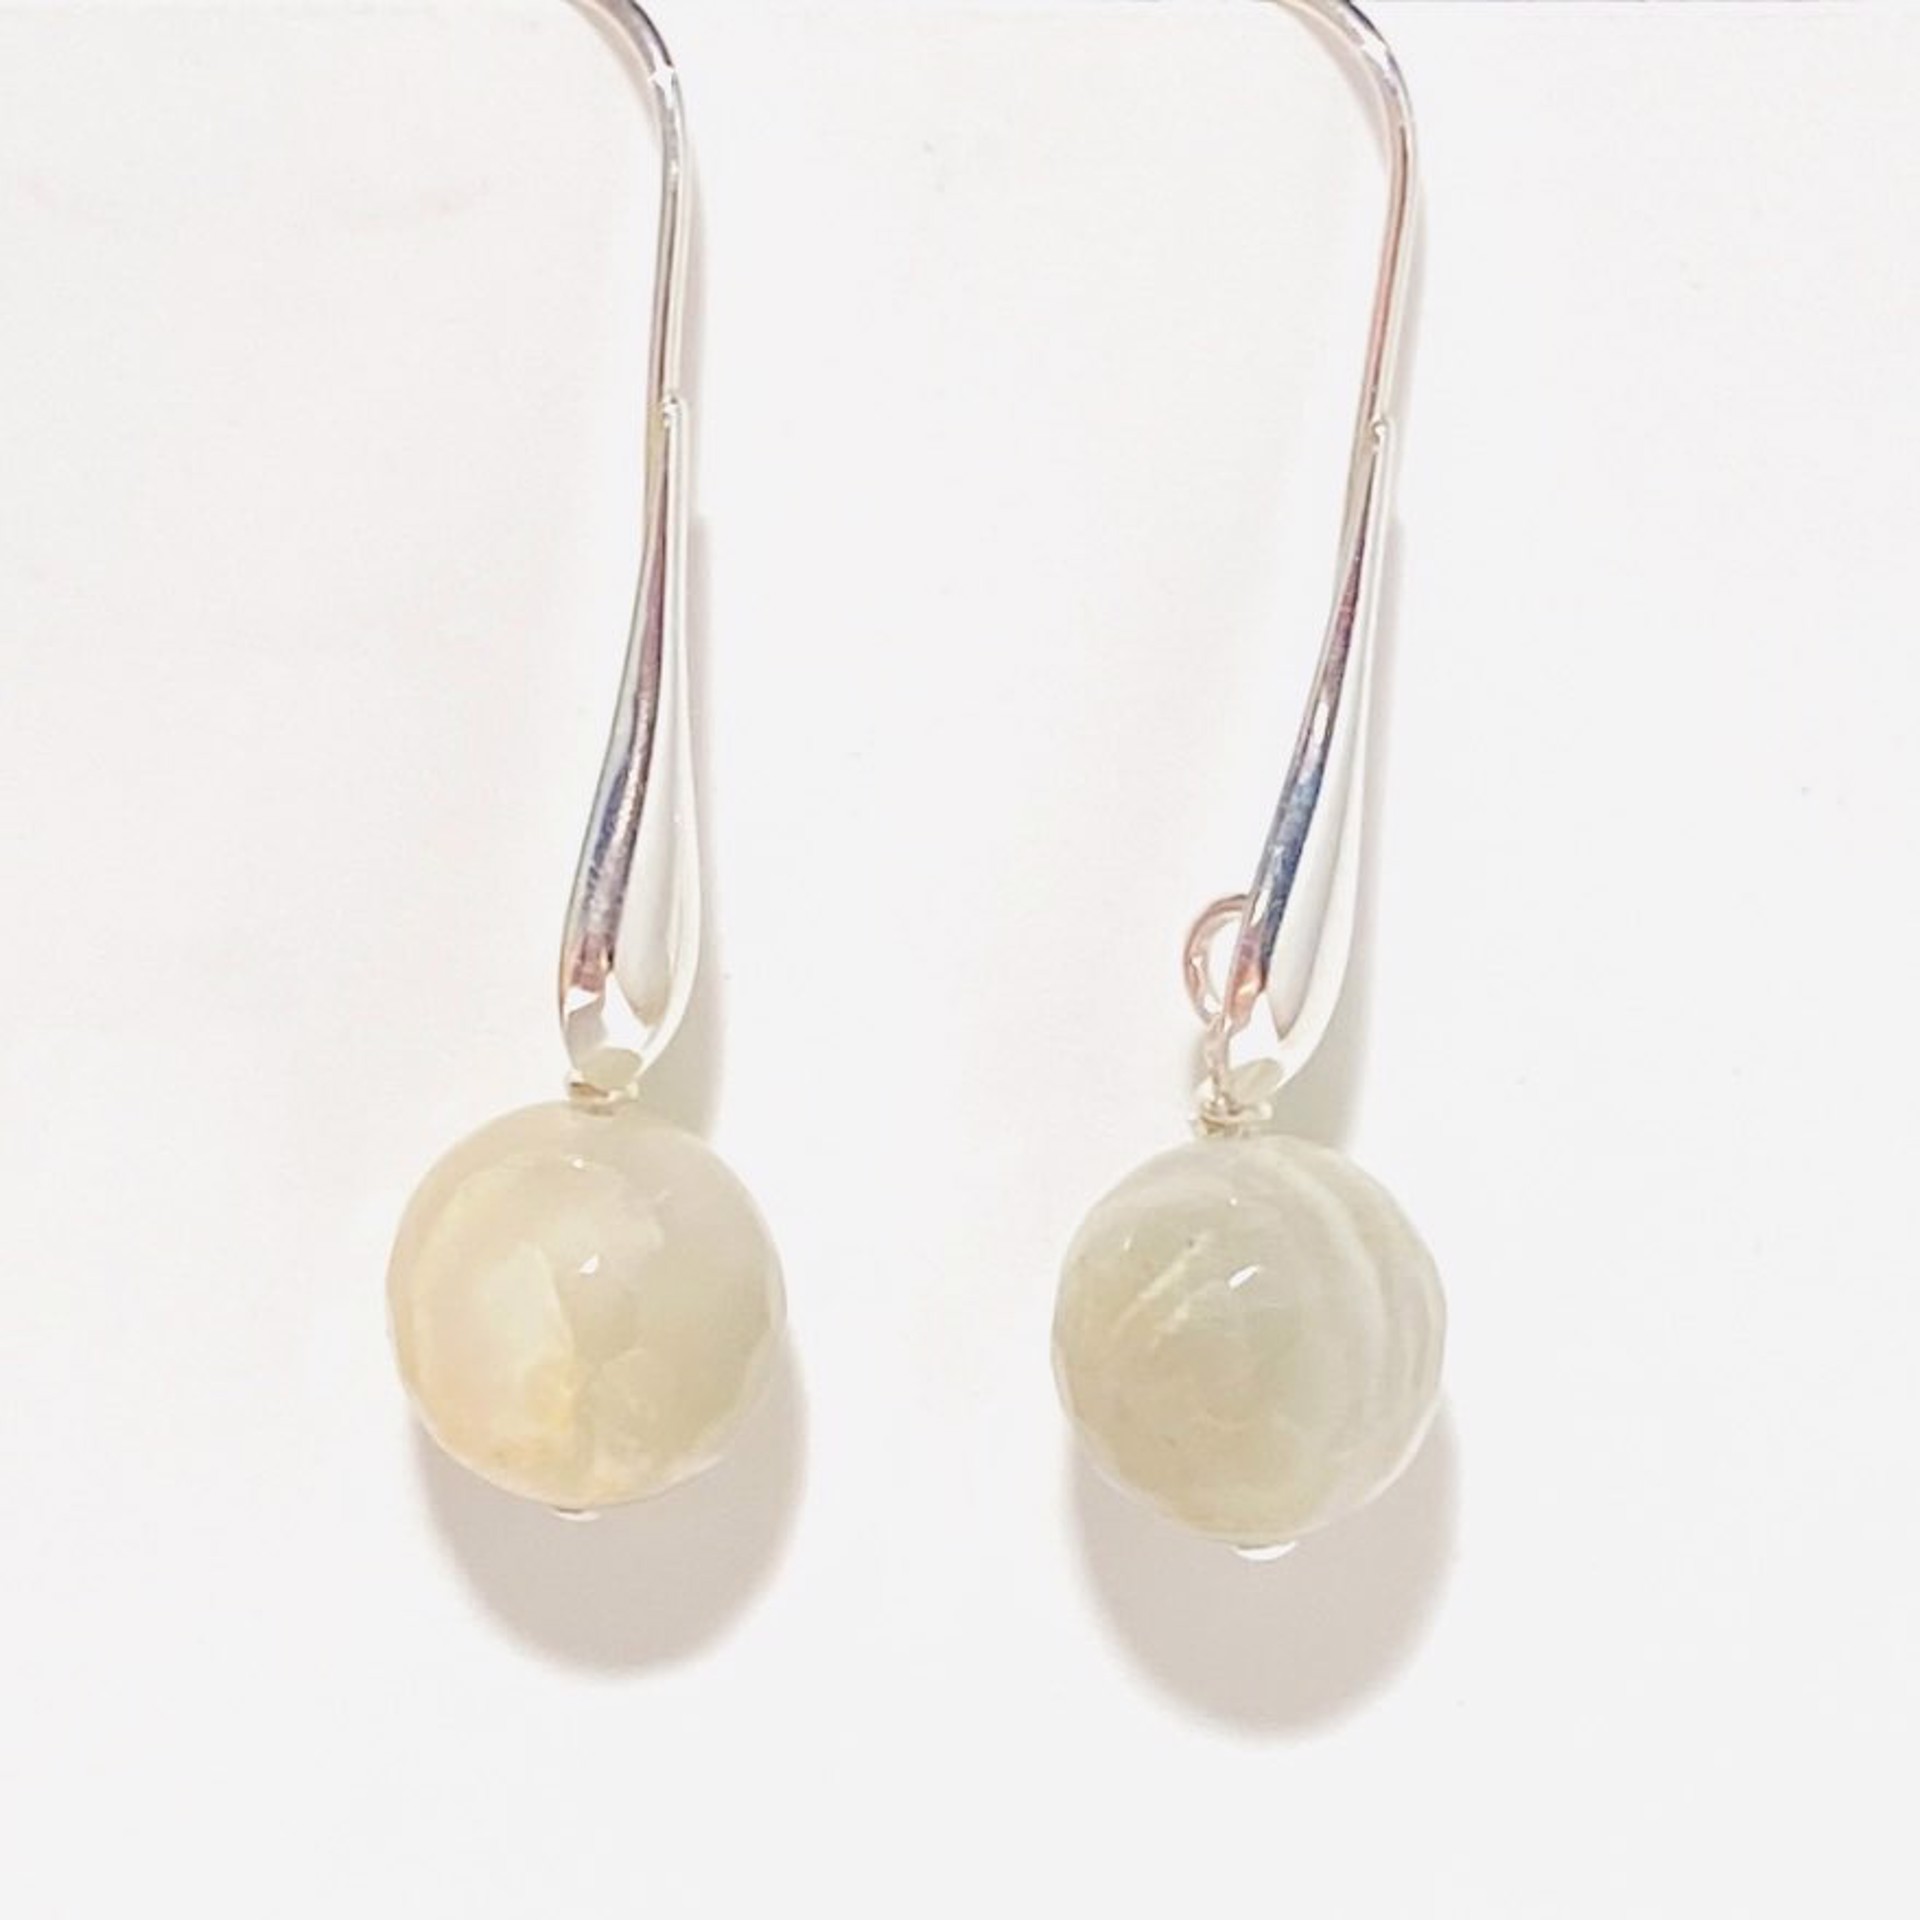 Faceted Moonstone Earrings LR23-38 by Legare Riano